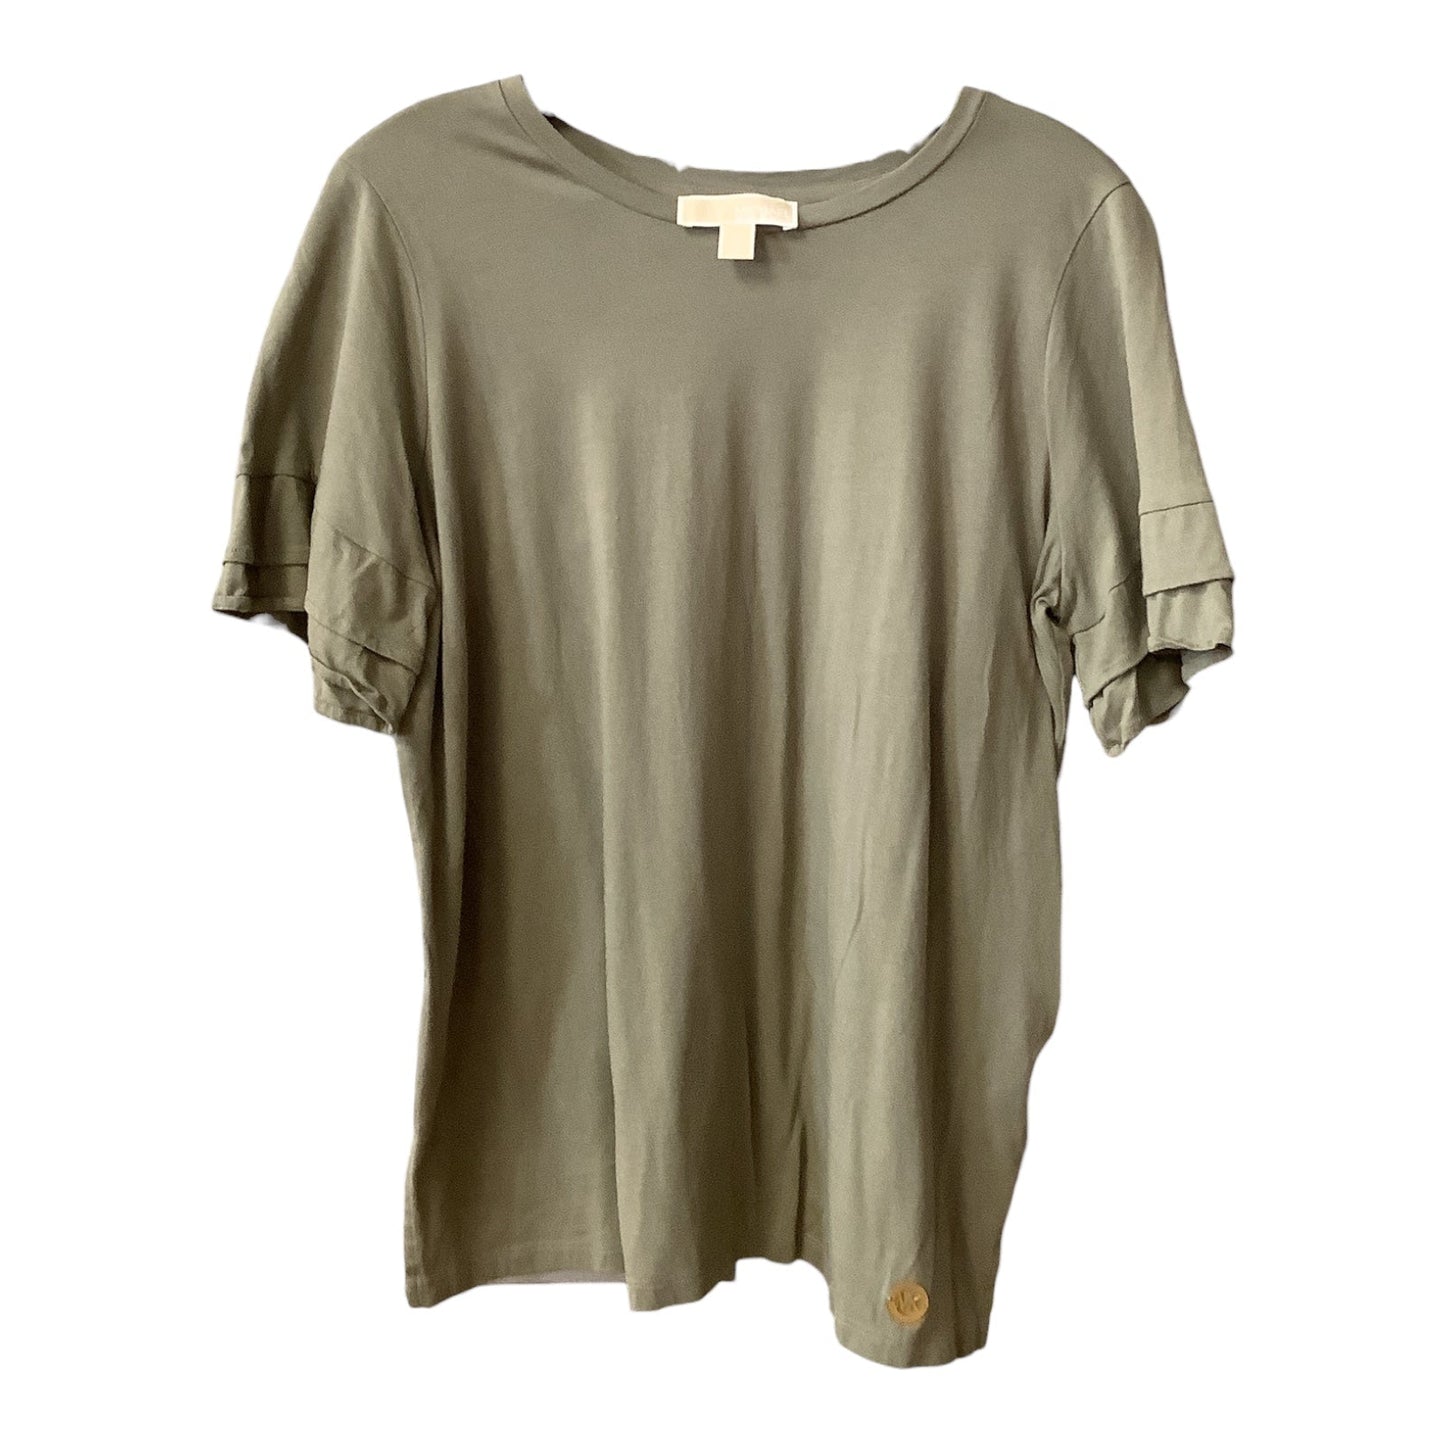 Green Top Short Sleeve Michael By Michael Kors, Size L